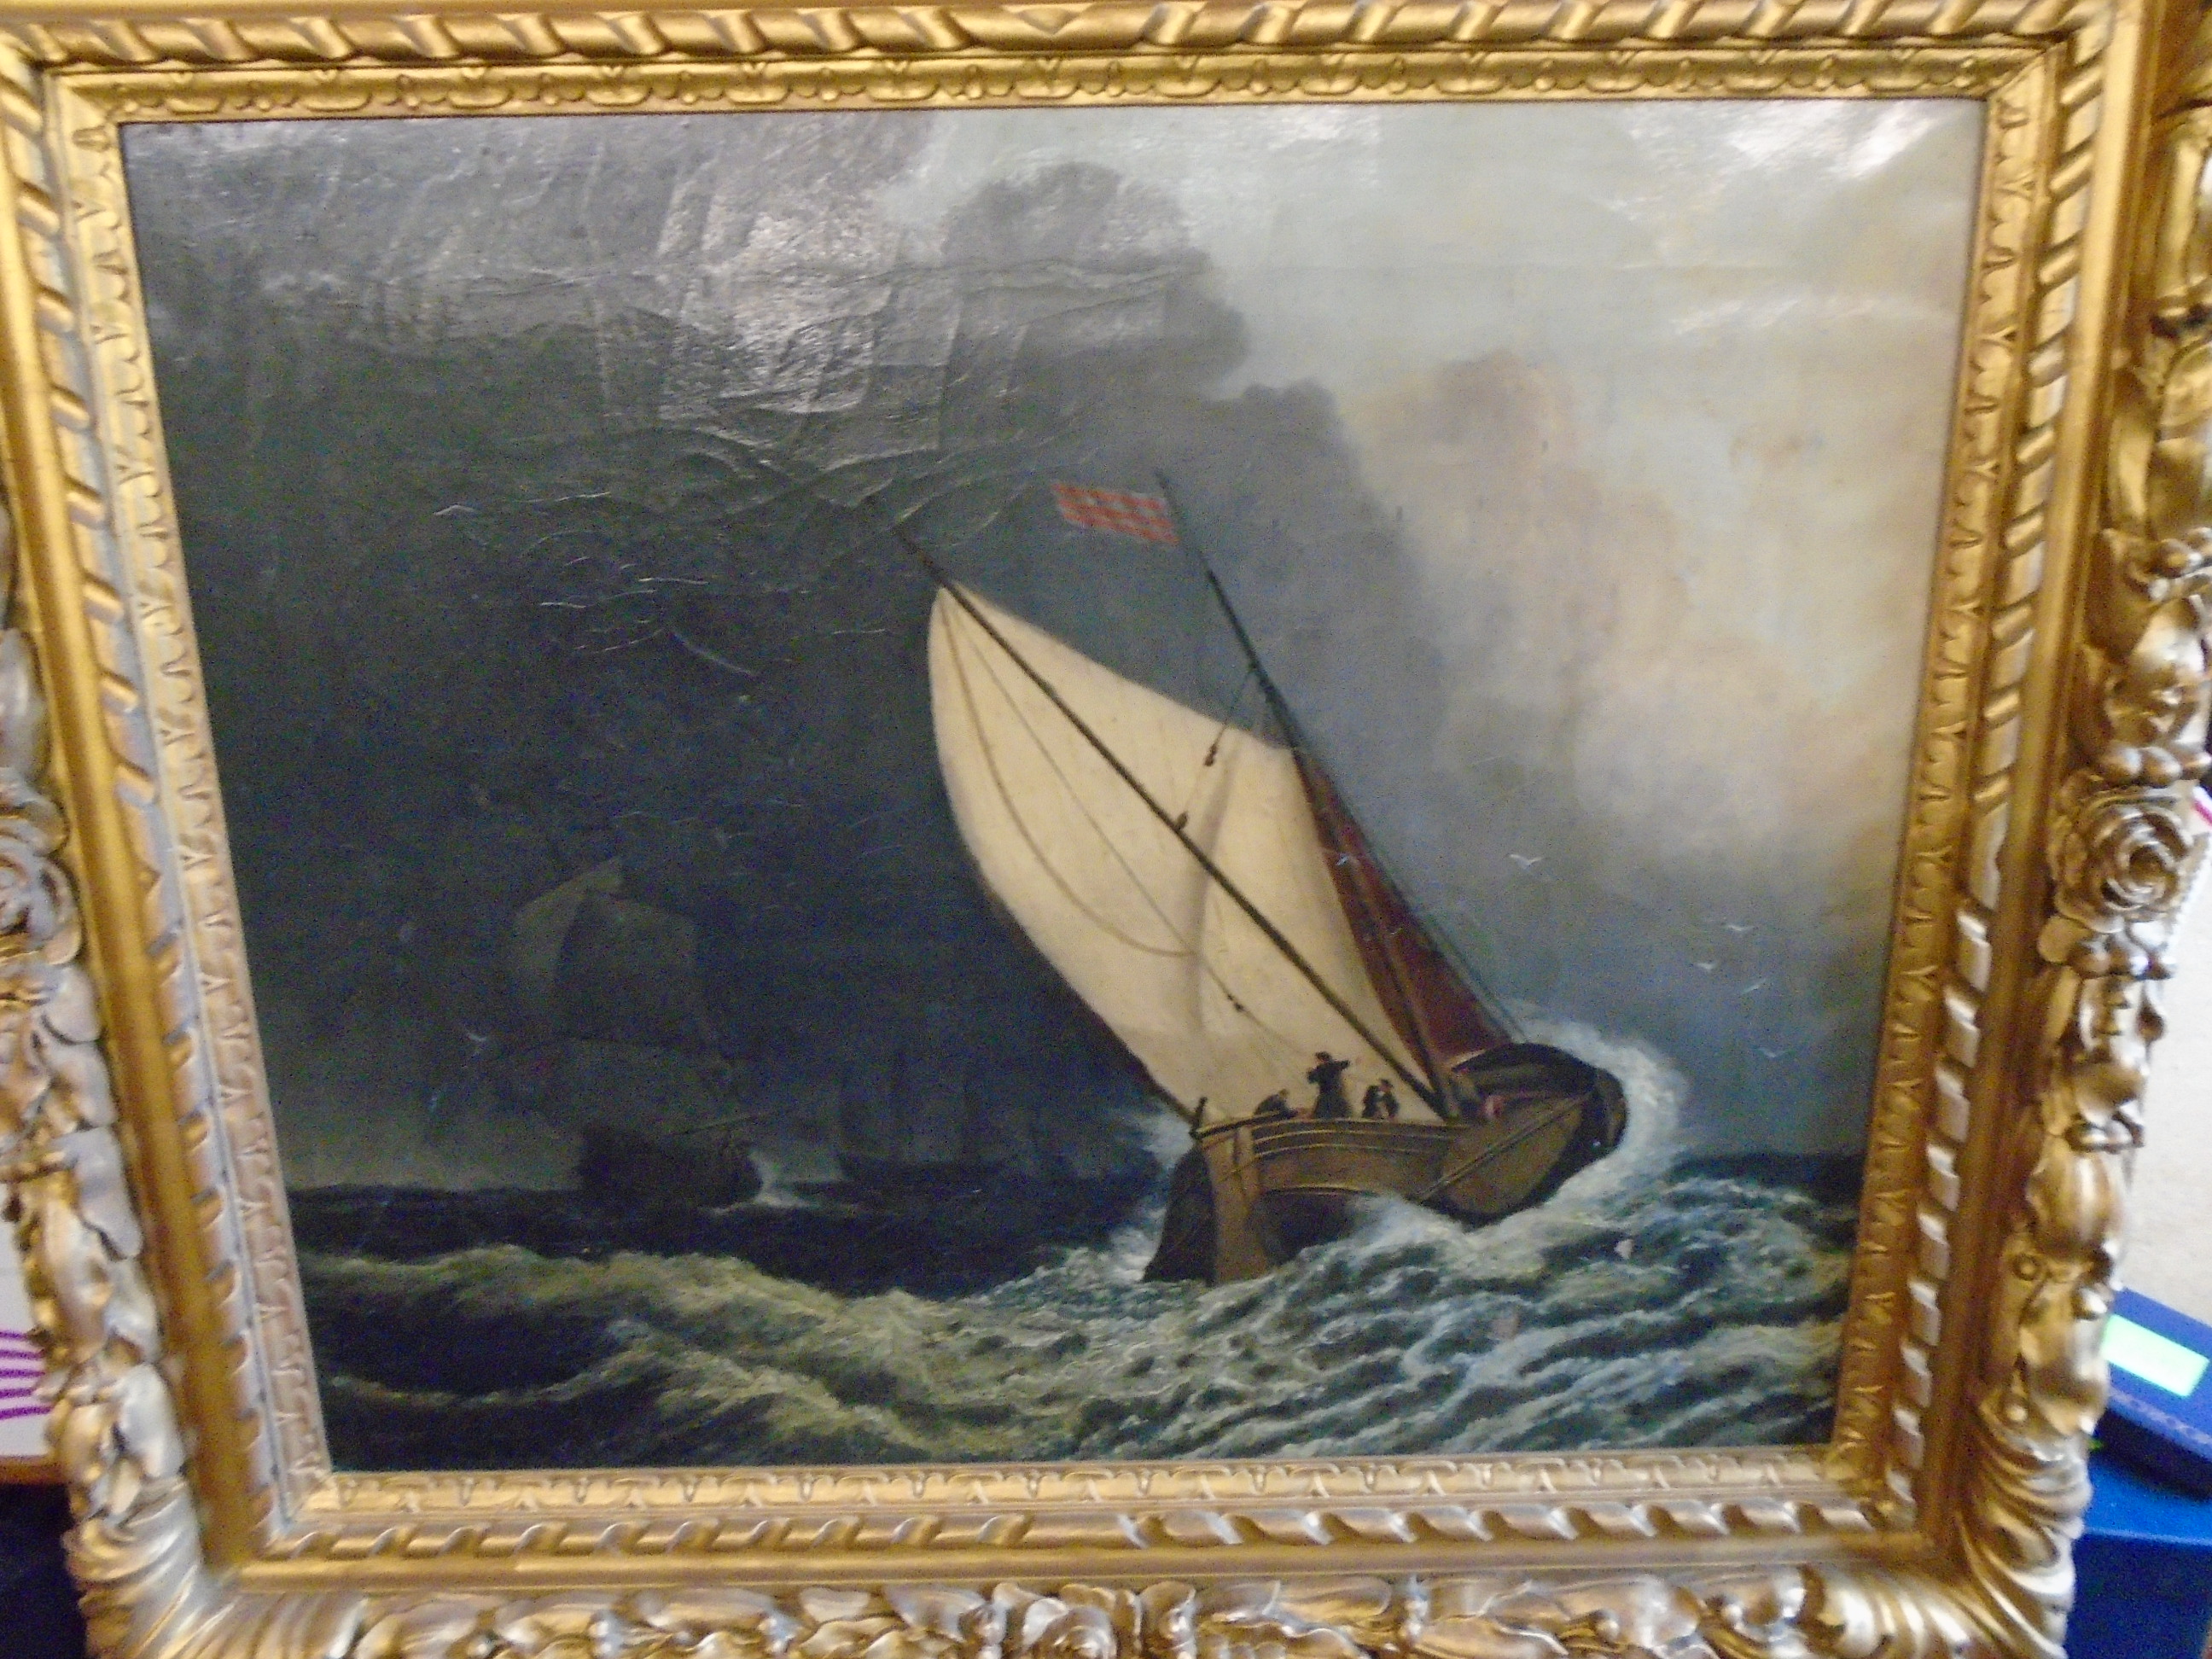 OIL ON CANVAS OF SHIPS IN STORMY SEAS ATTRIBUTED TO W NEWCOME 1842 A/F - Image 2 of 6